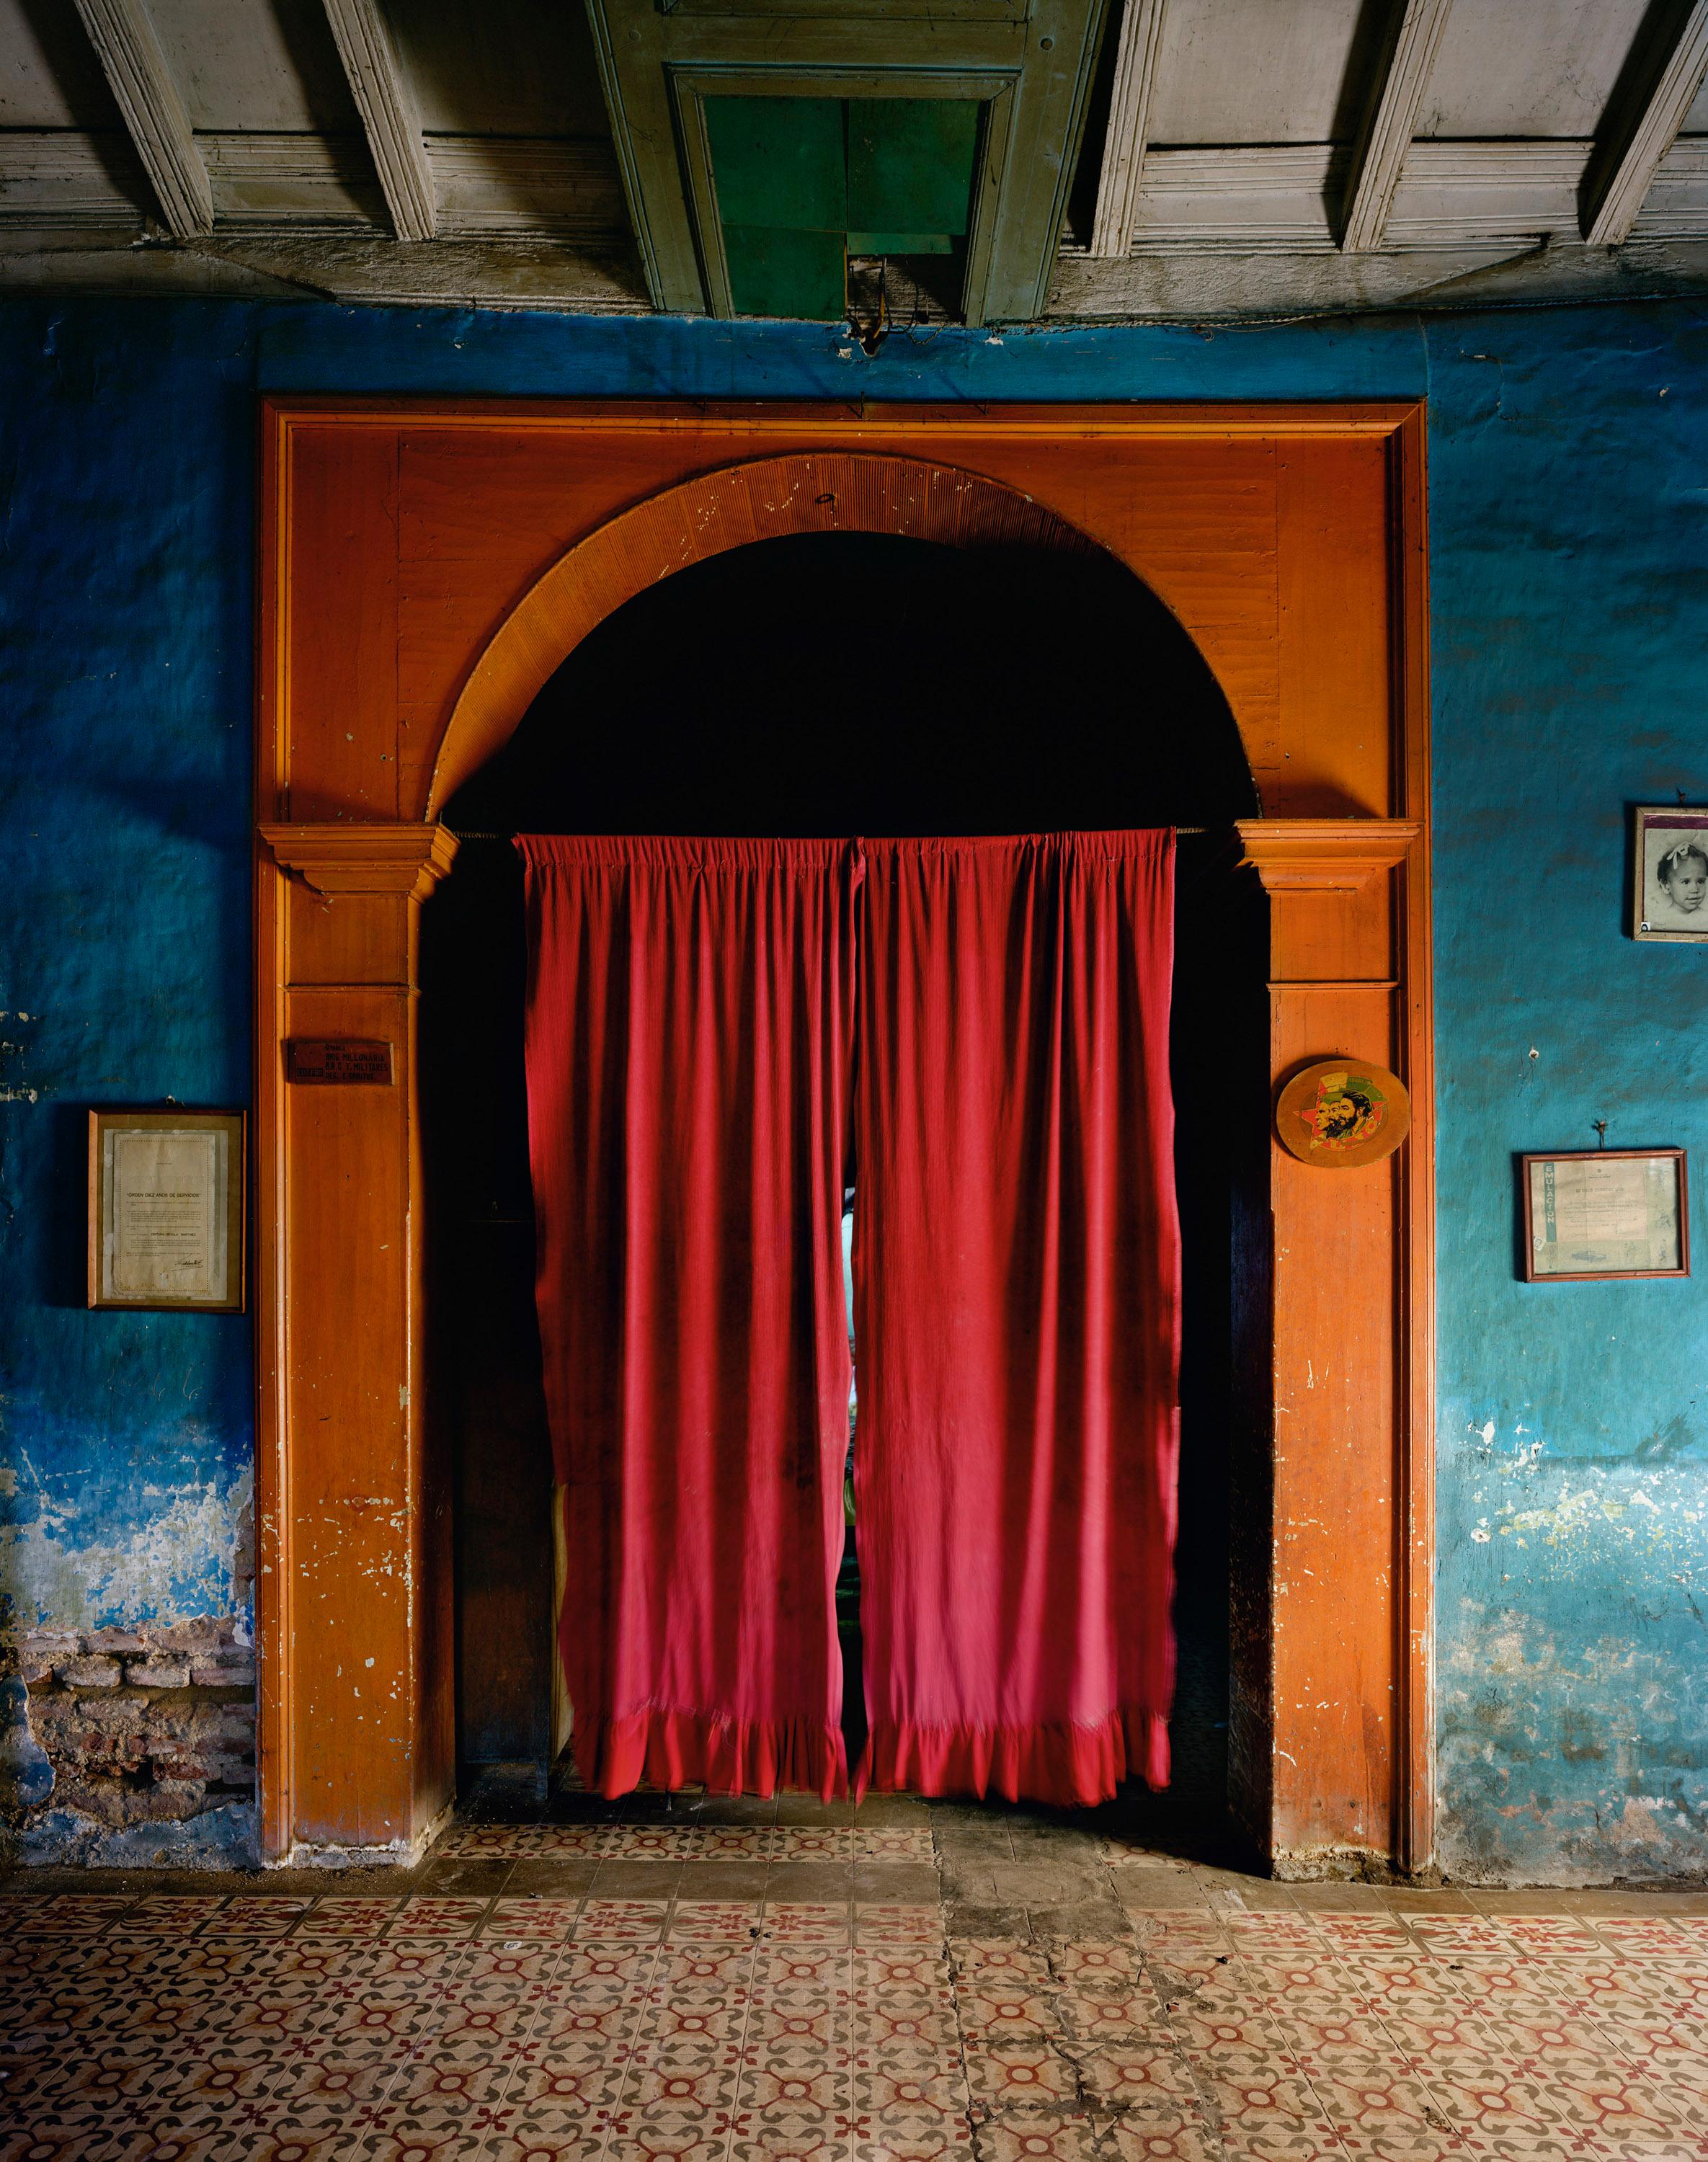 Archival Pigment Print

Red Curtains used for santeria

All available sizes & editions for each size of this photograph:
60" X 50"- Edition of 5 + 2 Artist Proofs
90" X 70"-  Edition of 5 + 2 Artist Proofs

This photograph will be printed once